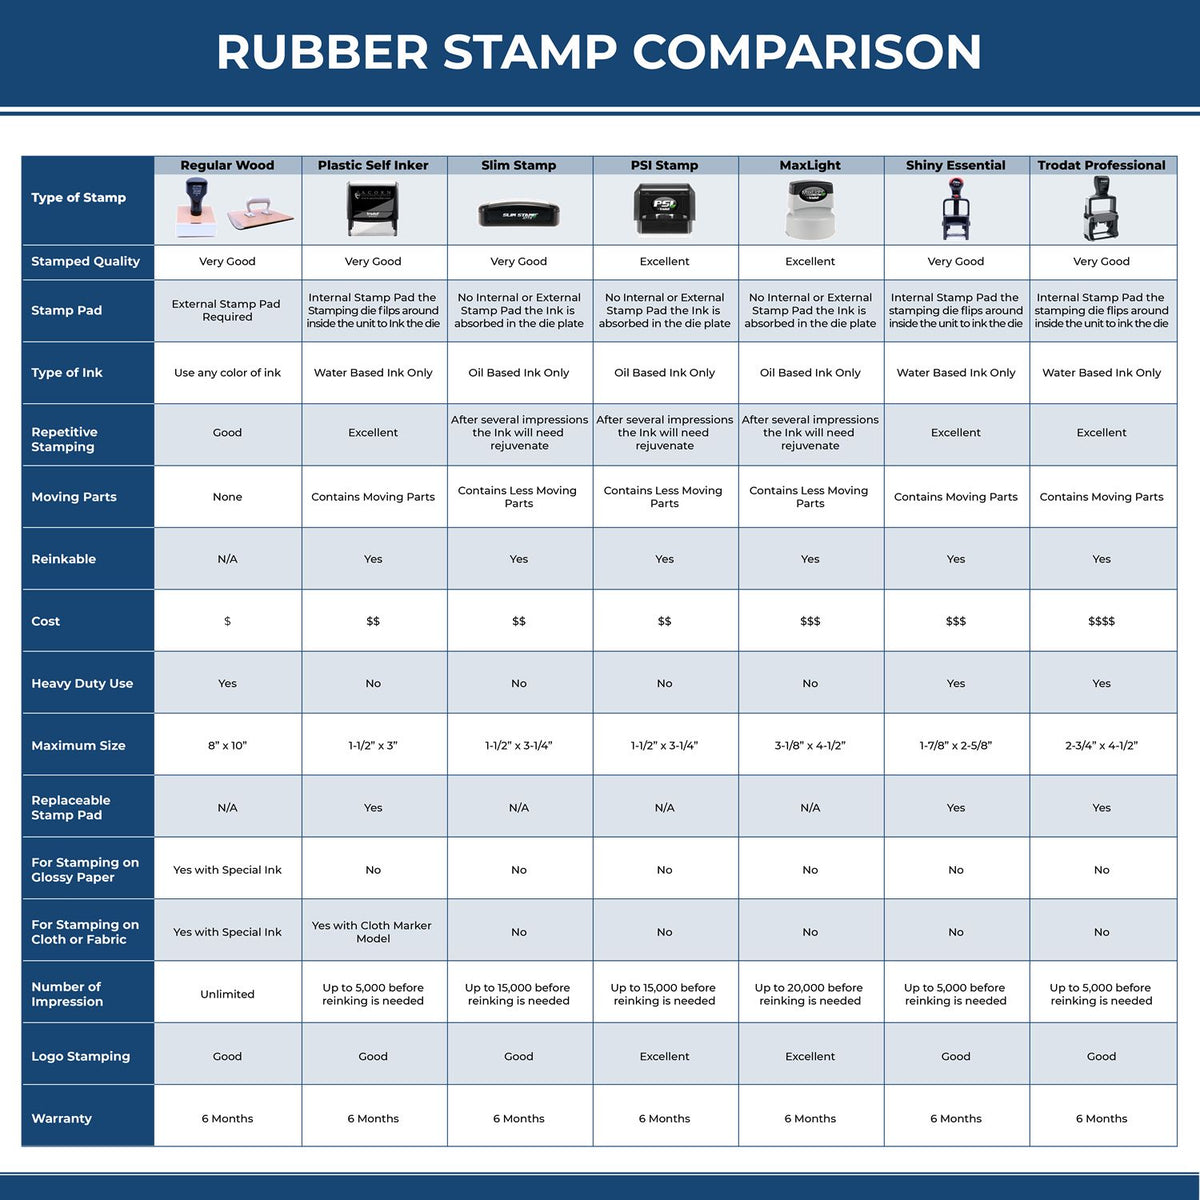 A comparison chart for the different types of mount models available for the Guam Landscape Architectural Seal Stamp.